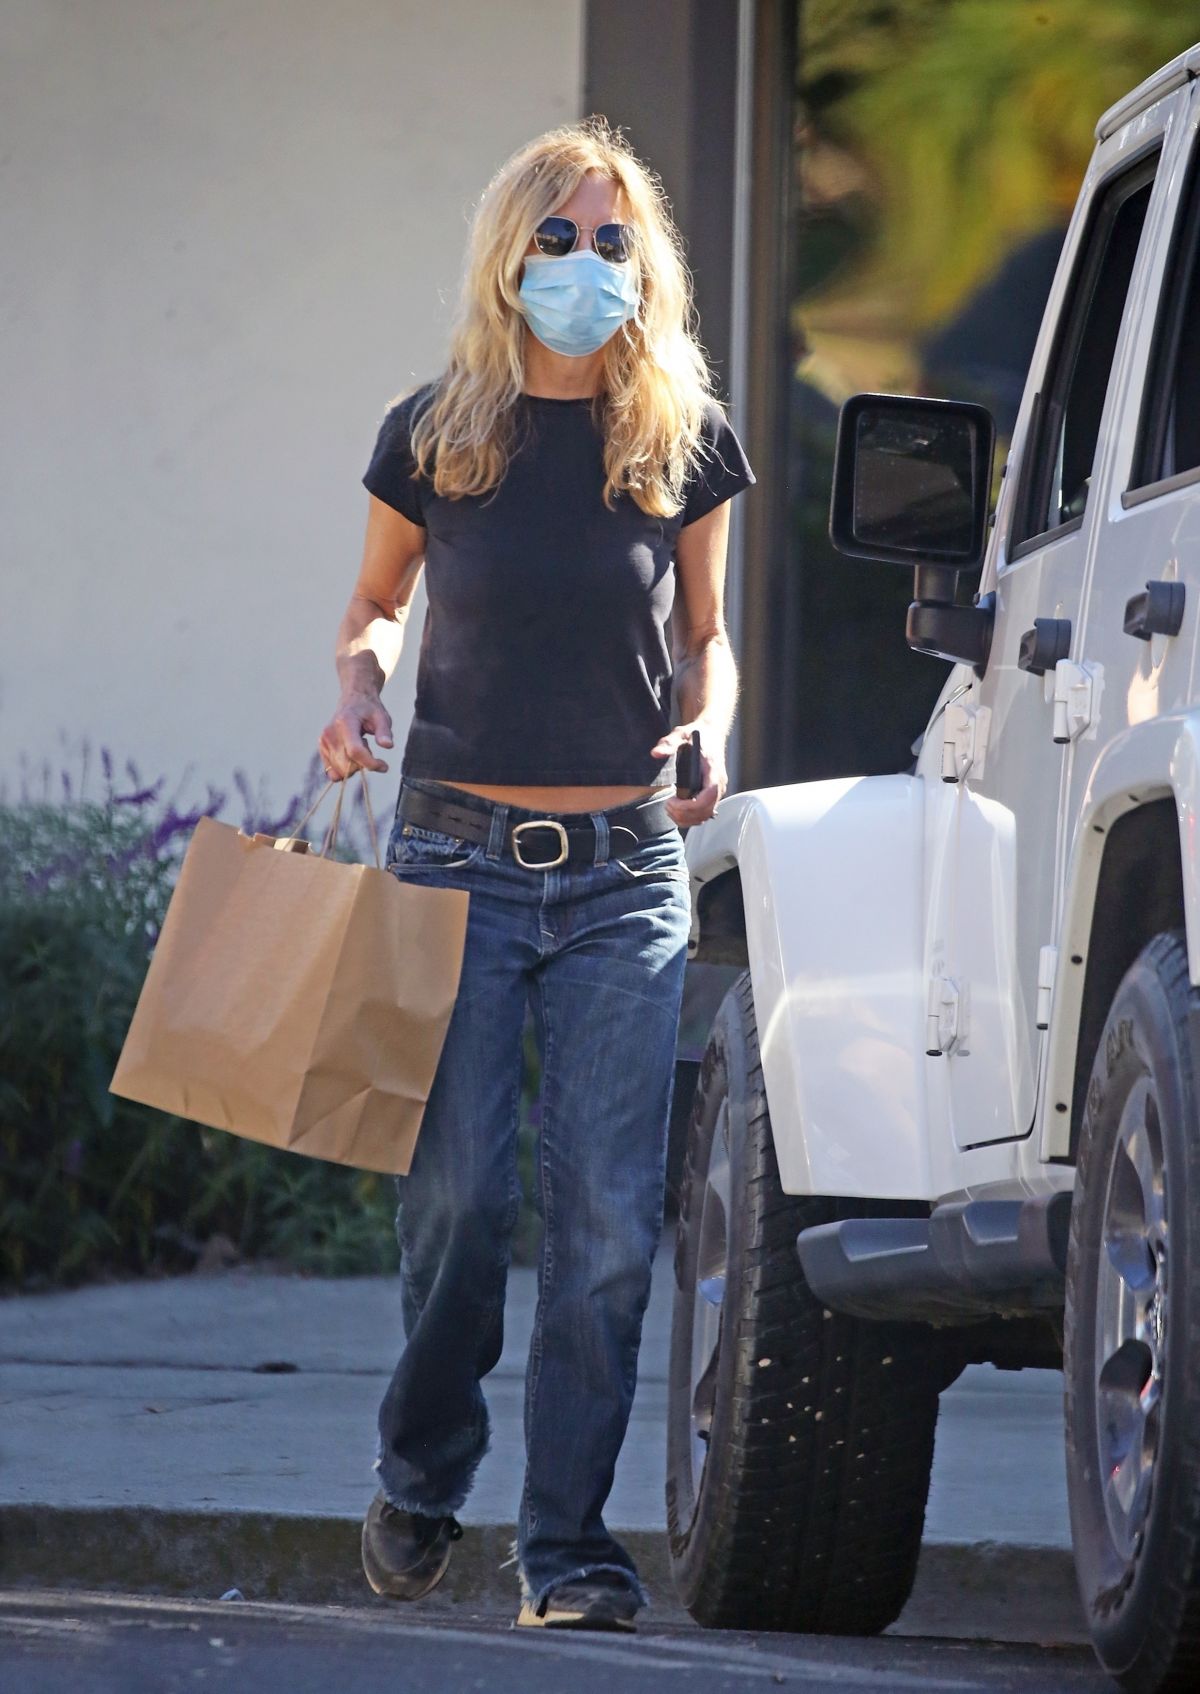 meg-ryan-out-and-about-in-brentwood-10-31-2020-6.jpg